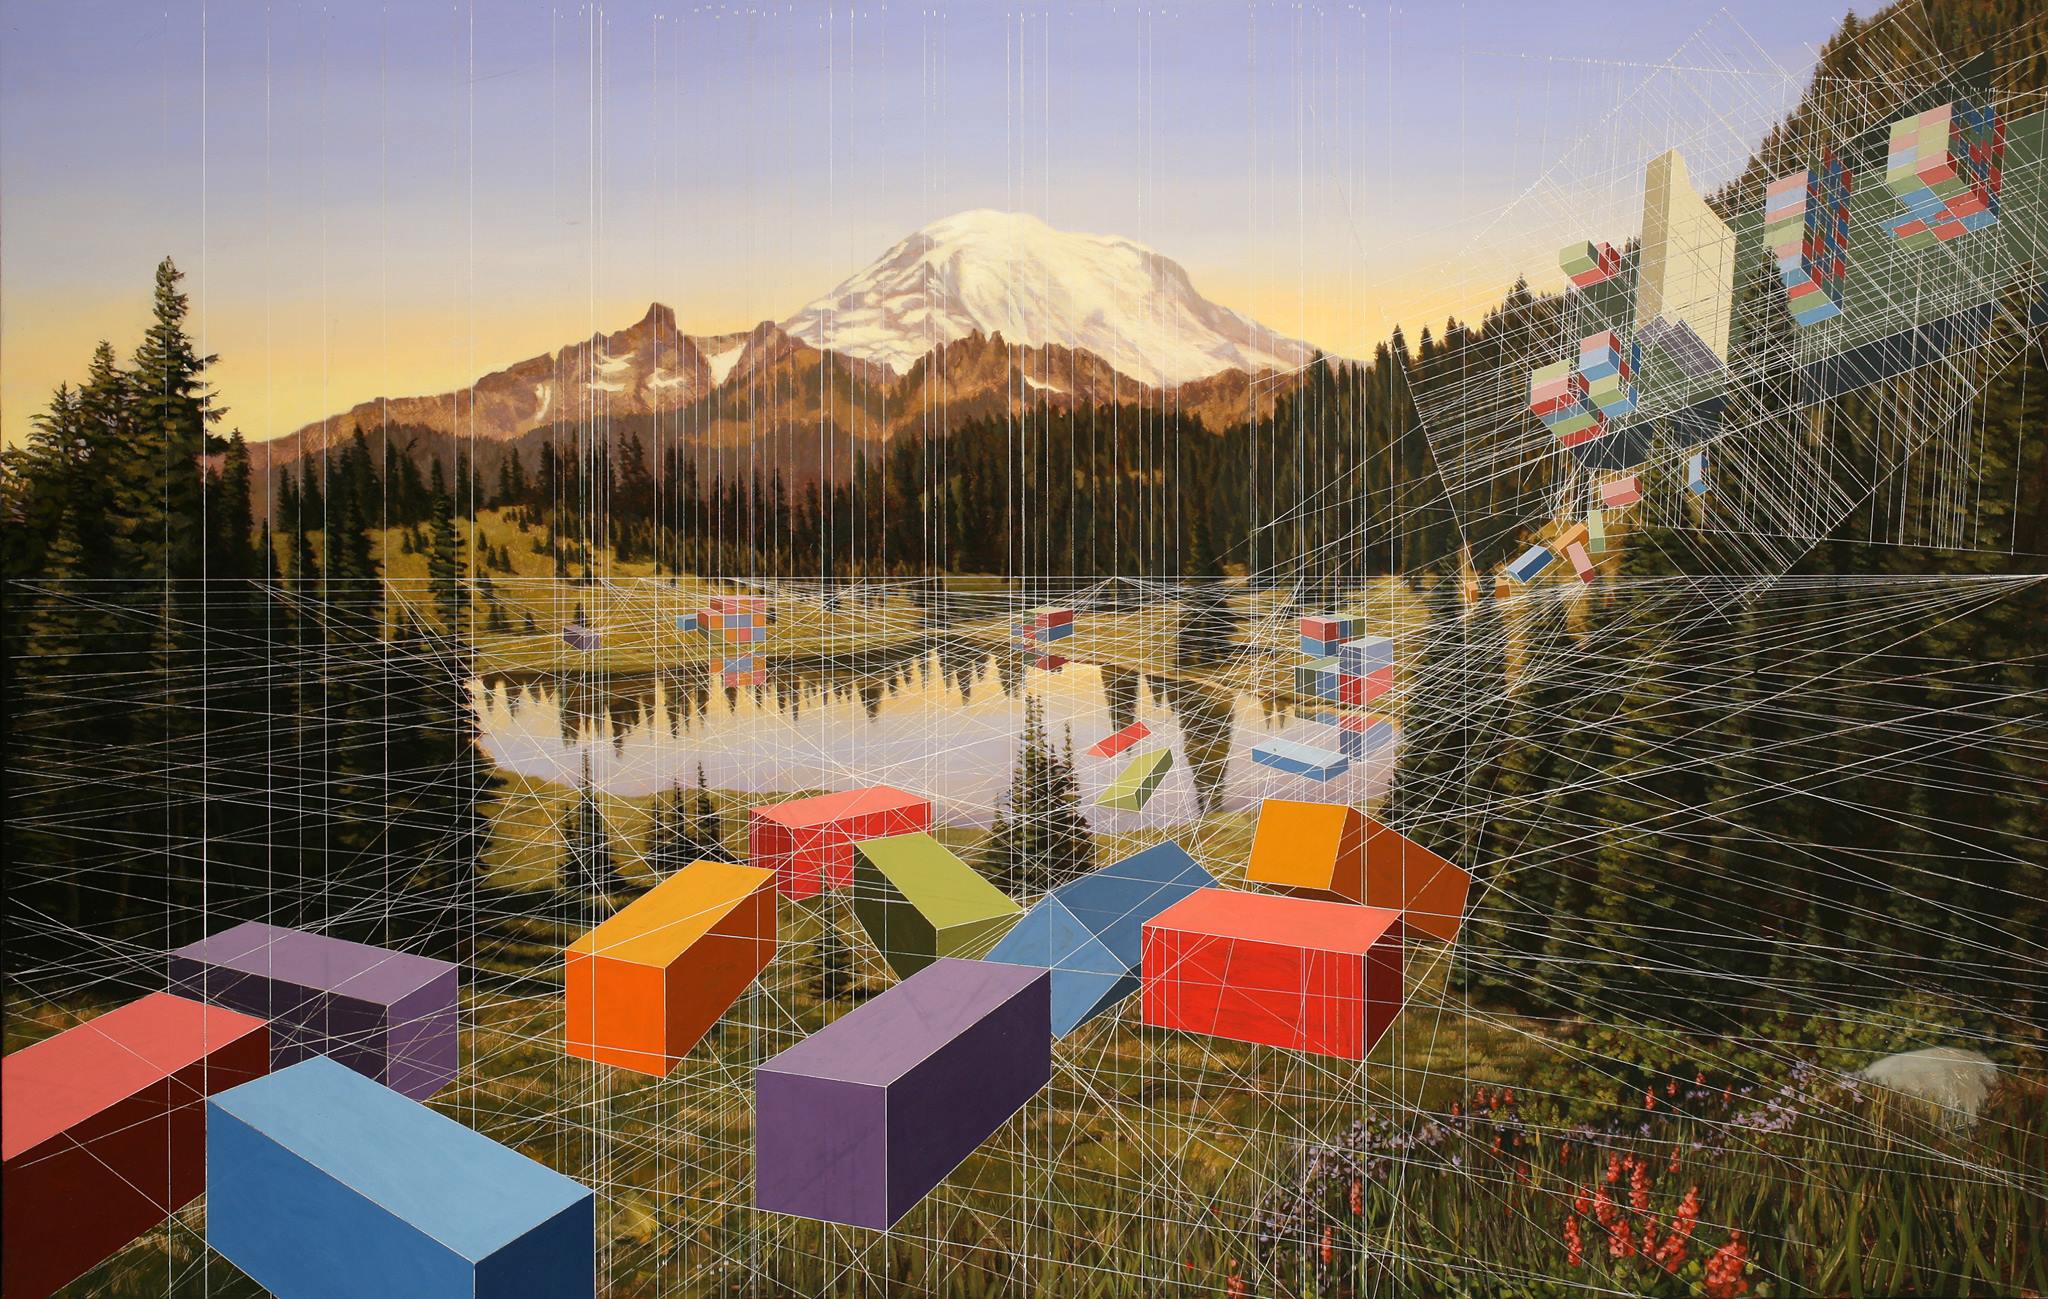 Art for the Environment: Seattle exhibitions exploring the natural